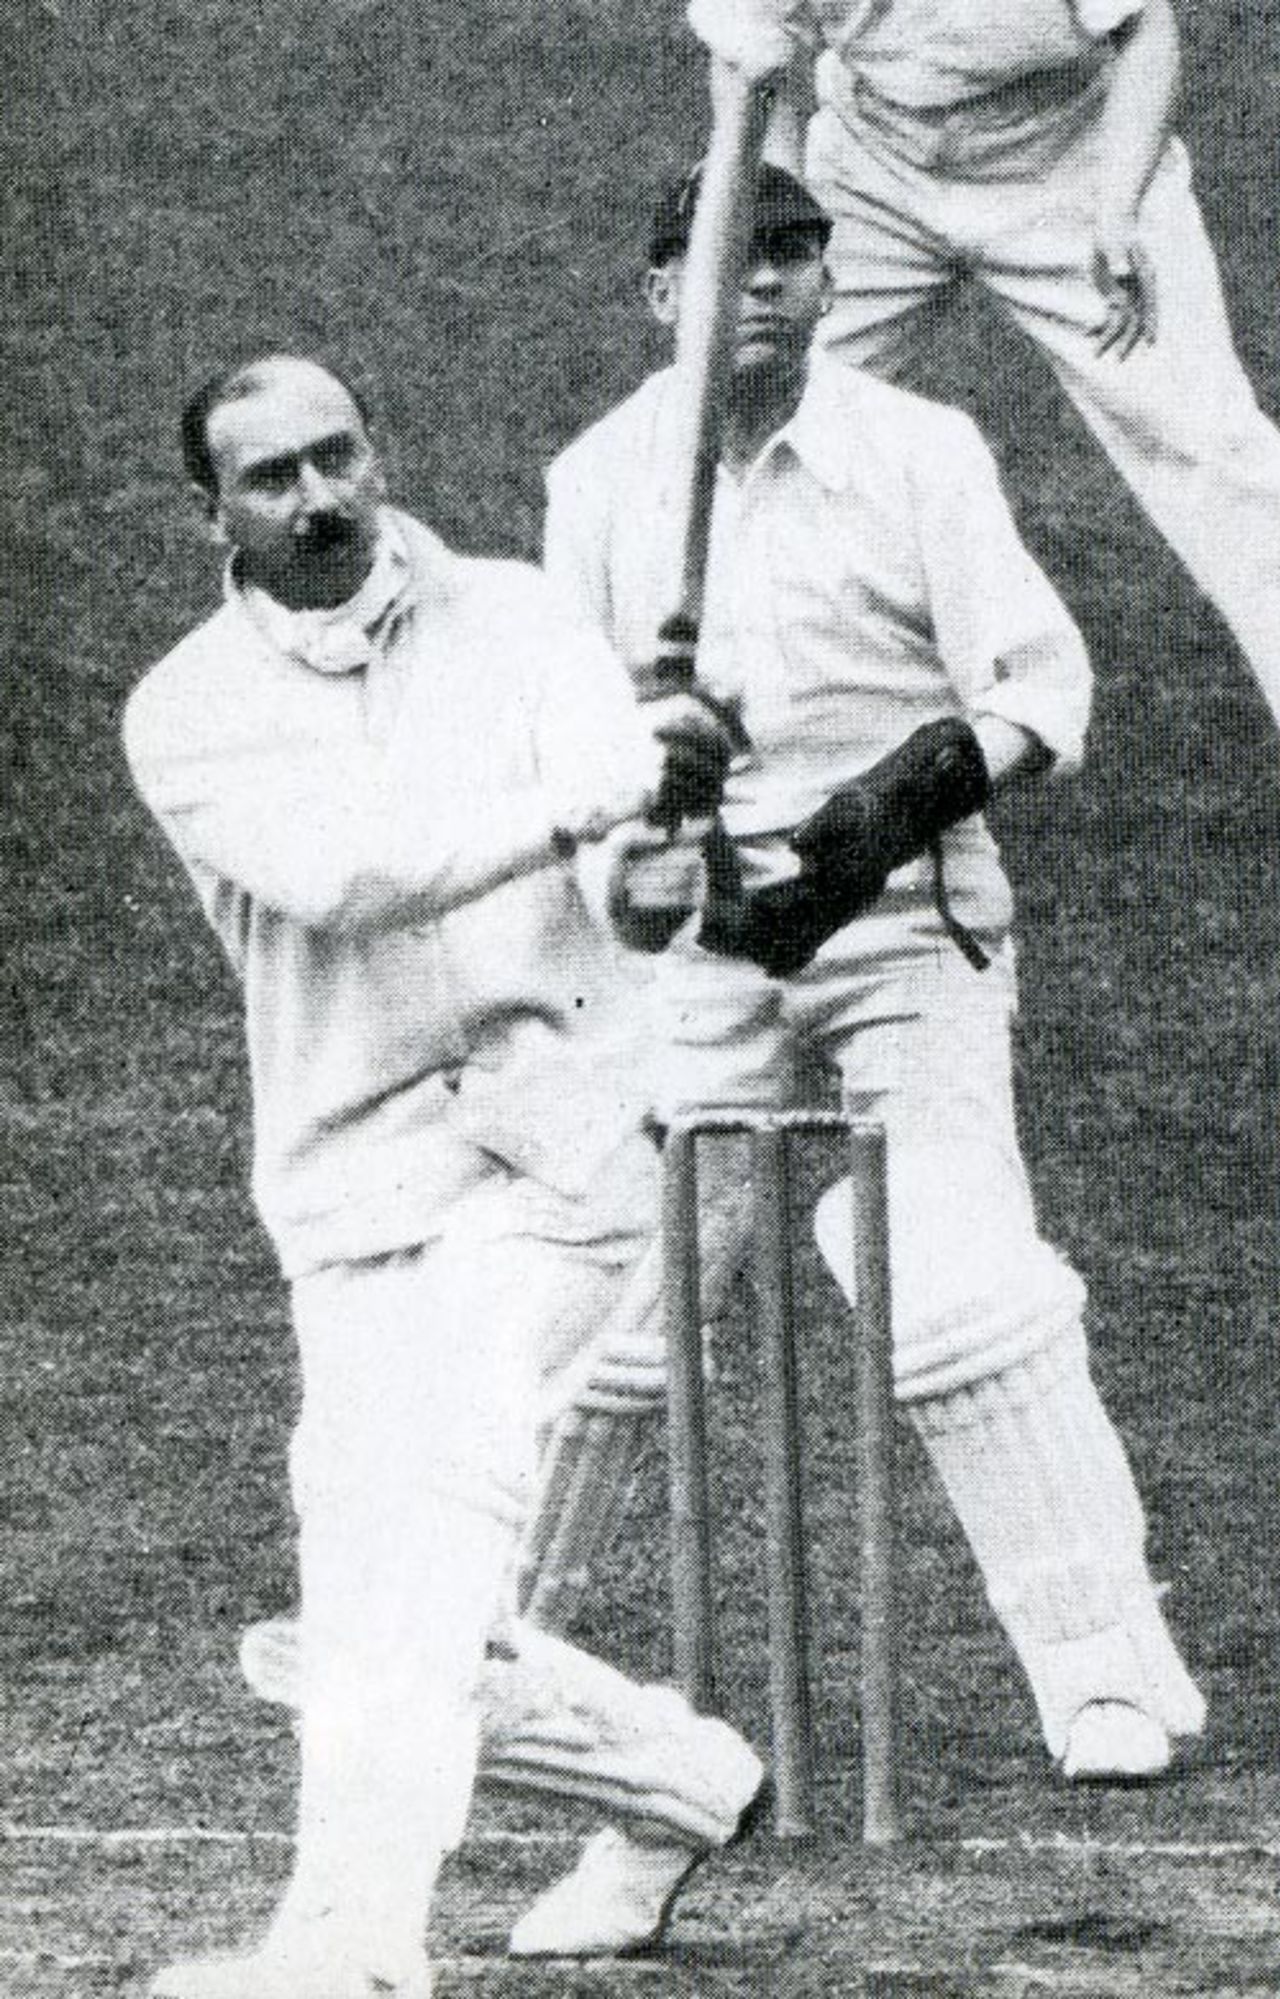 Percy Fender lofts a six in a Surrey trial game at The Oval in 1931